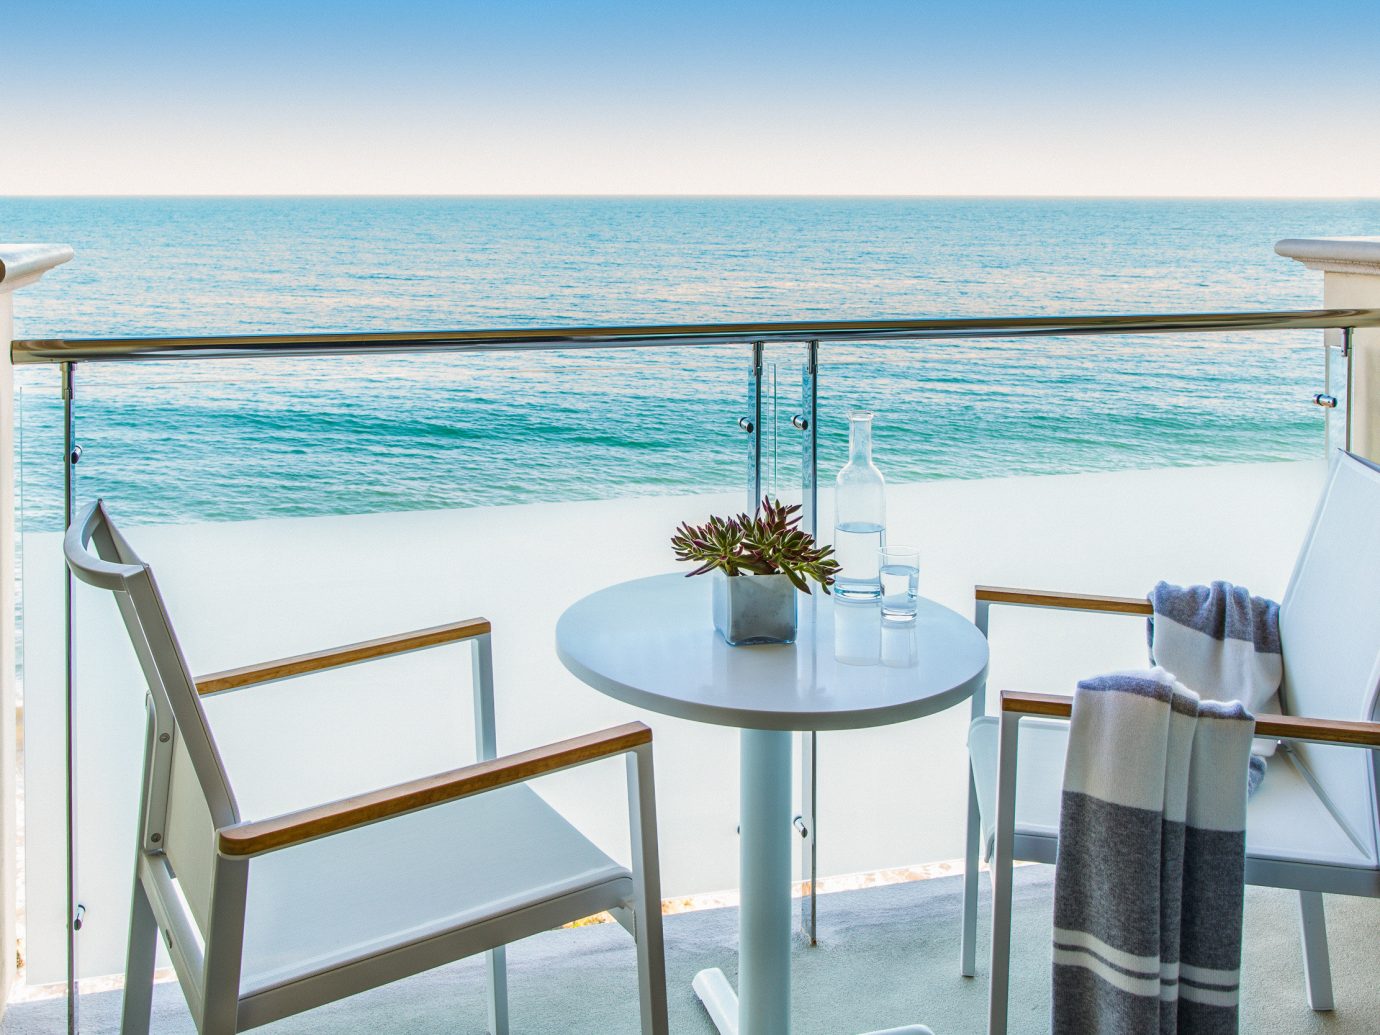 Arts + Culture Hotels Jetsetter Guides shopping Travel Trends Trip Ideas water sky chair body of water Sea outdoor table Ocean vacation furniture real estate Balcony overlooking shore Beach house Deck